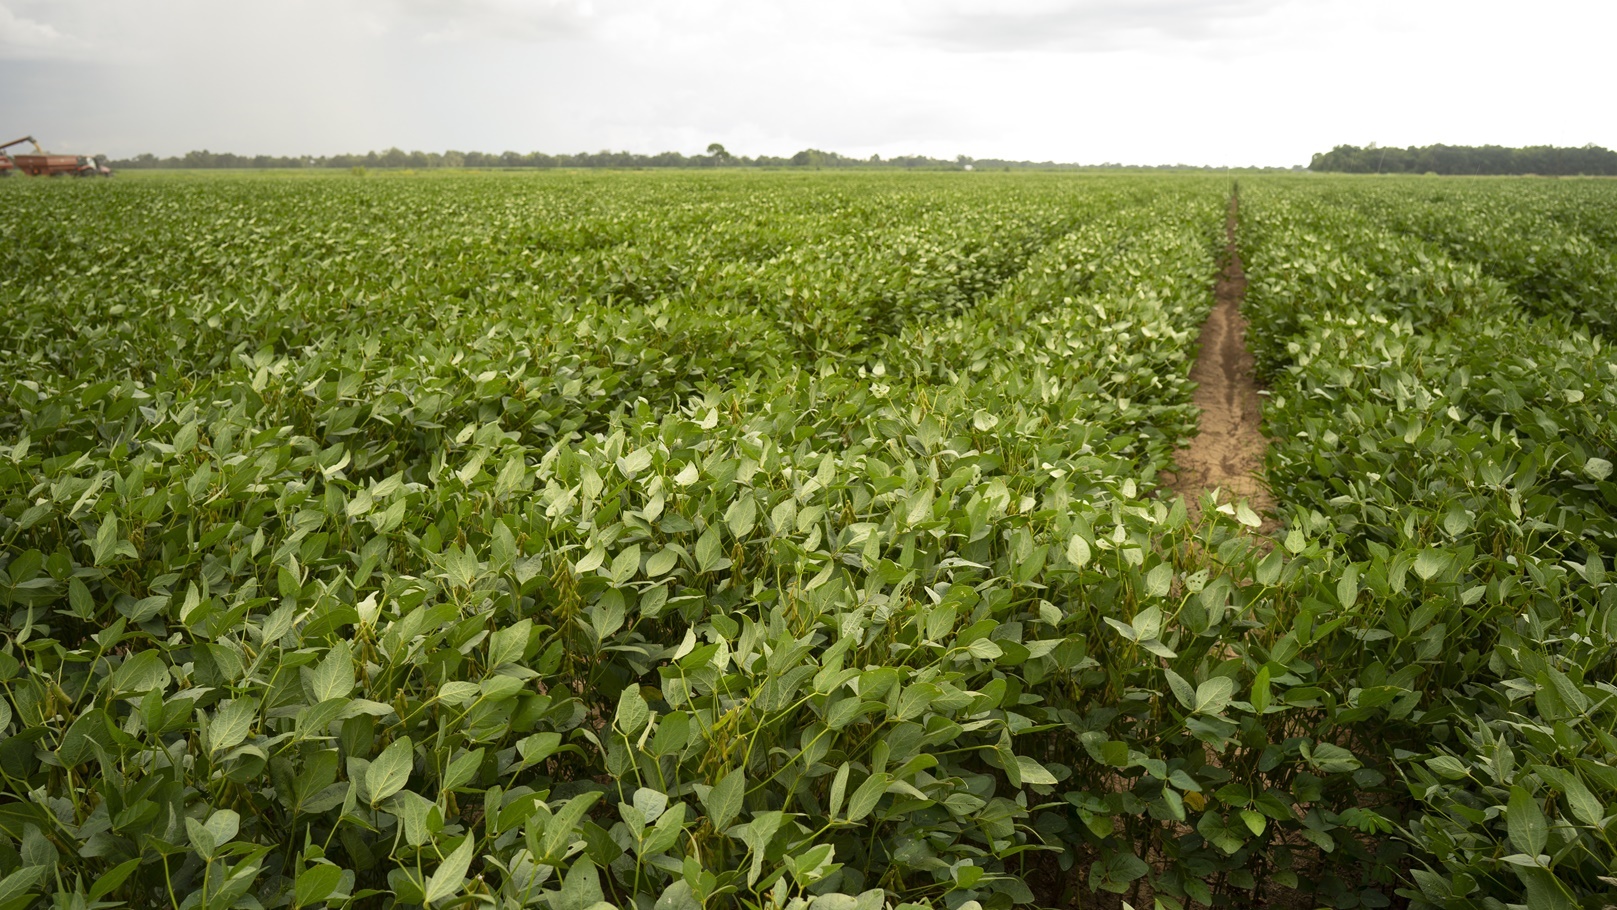 soy-beans-grow-big-and-lush-in-the-deep-south-usa-2021-08-26-22-38-17-utc